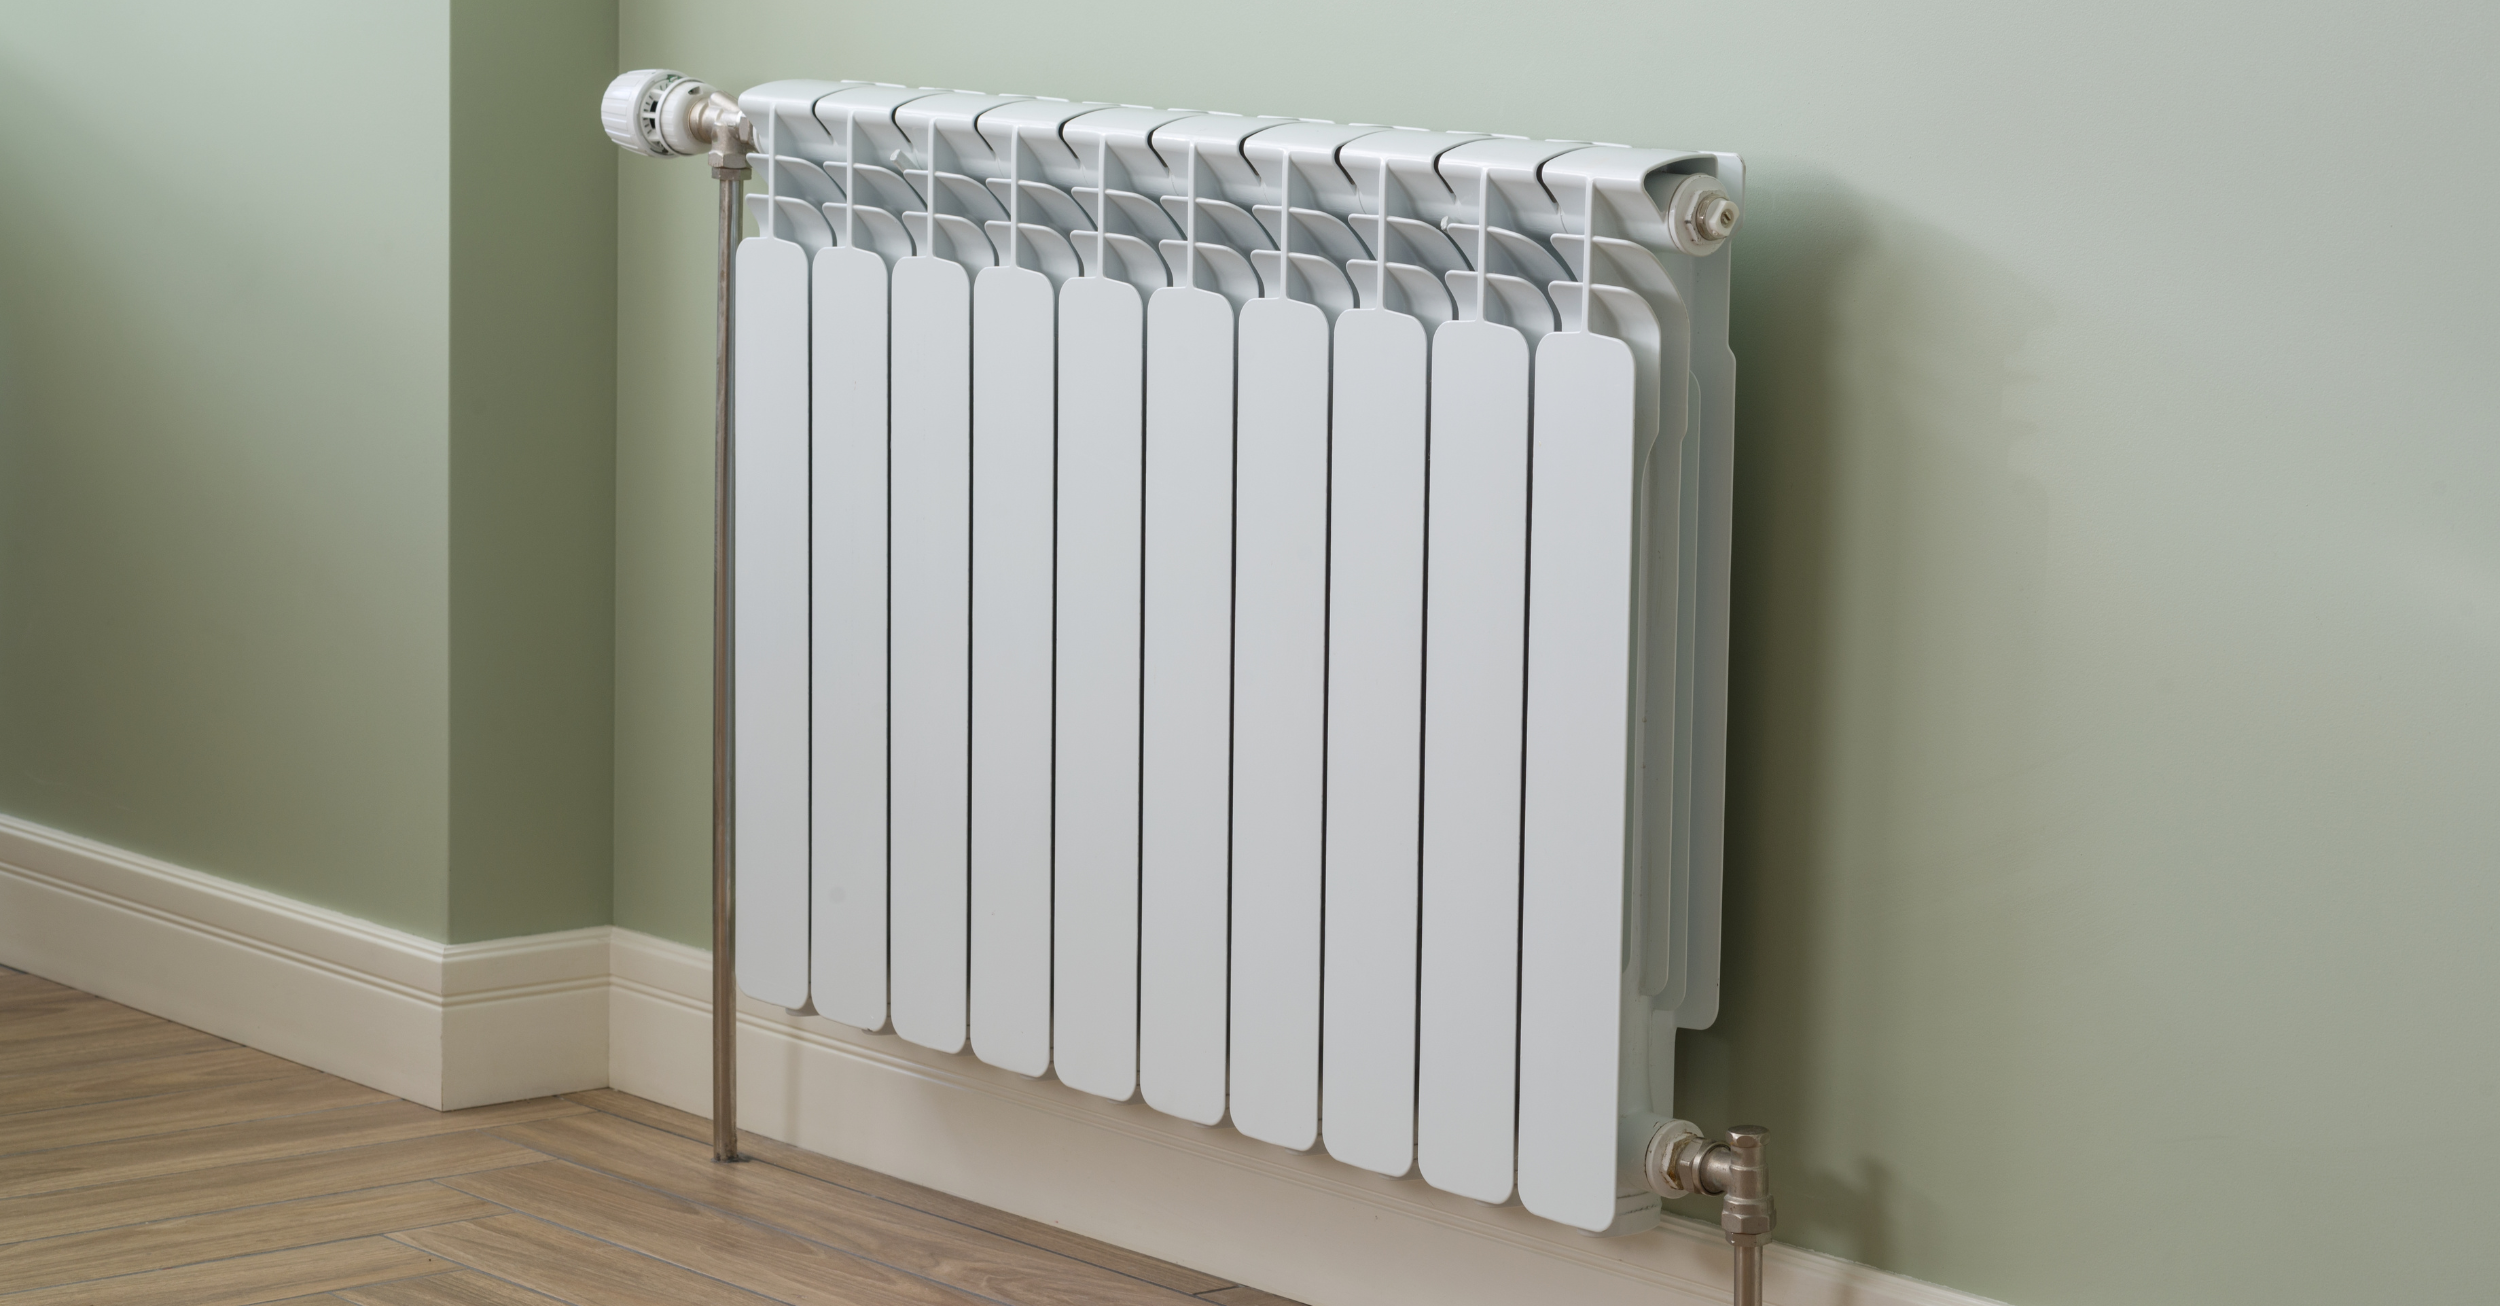 cost-effective electric heating system